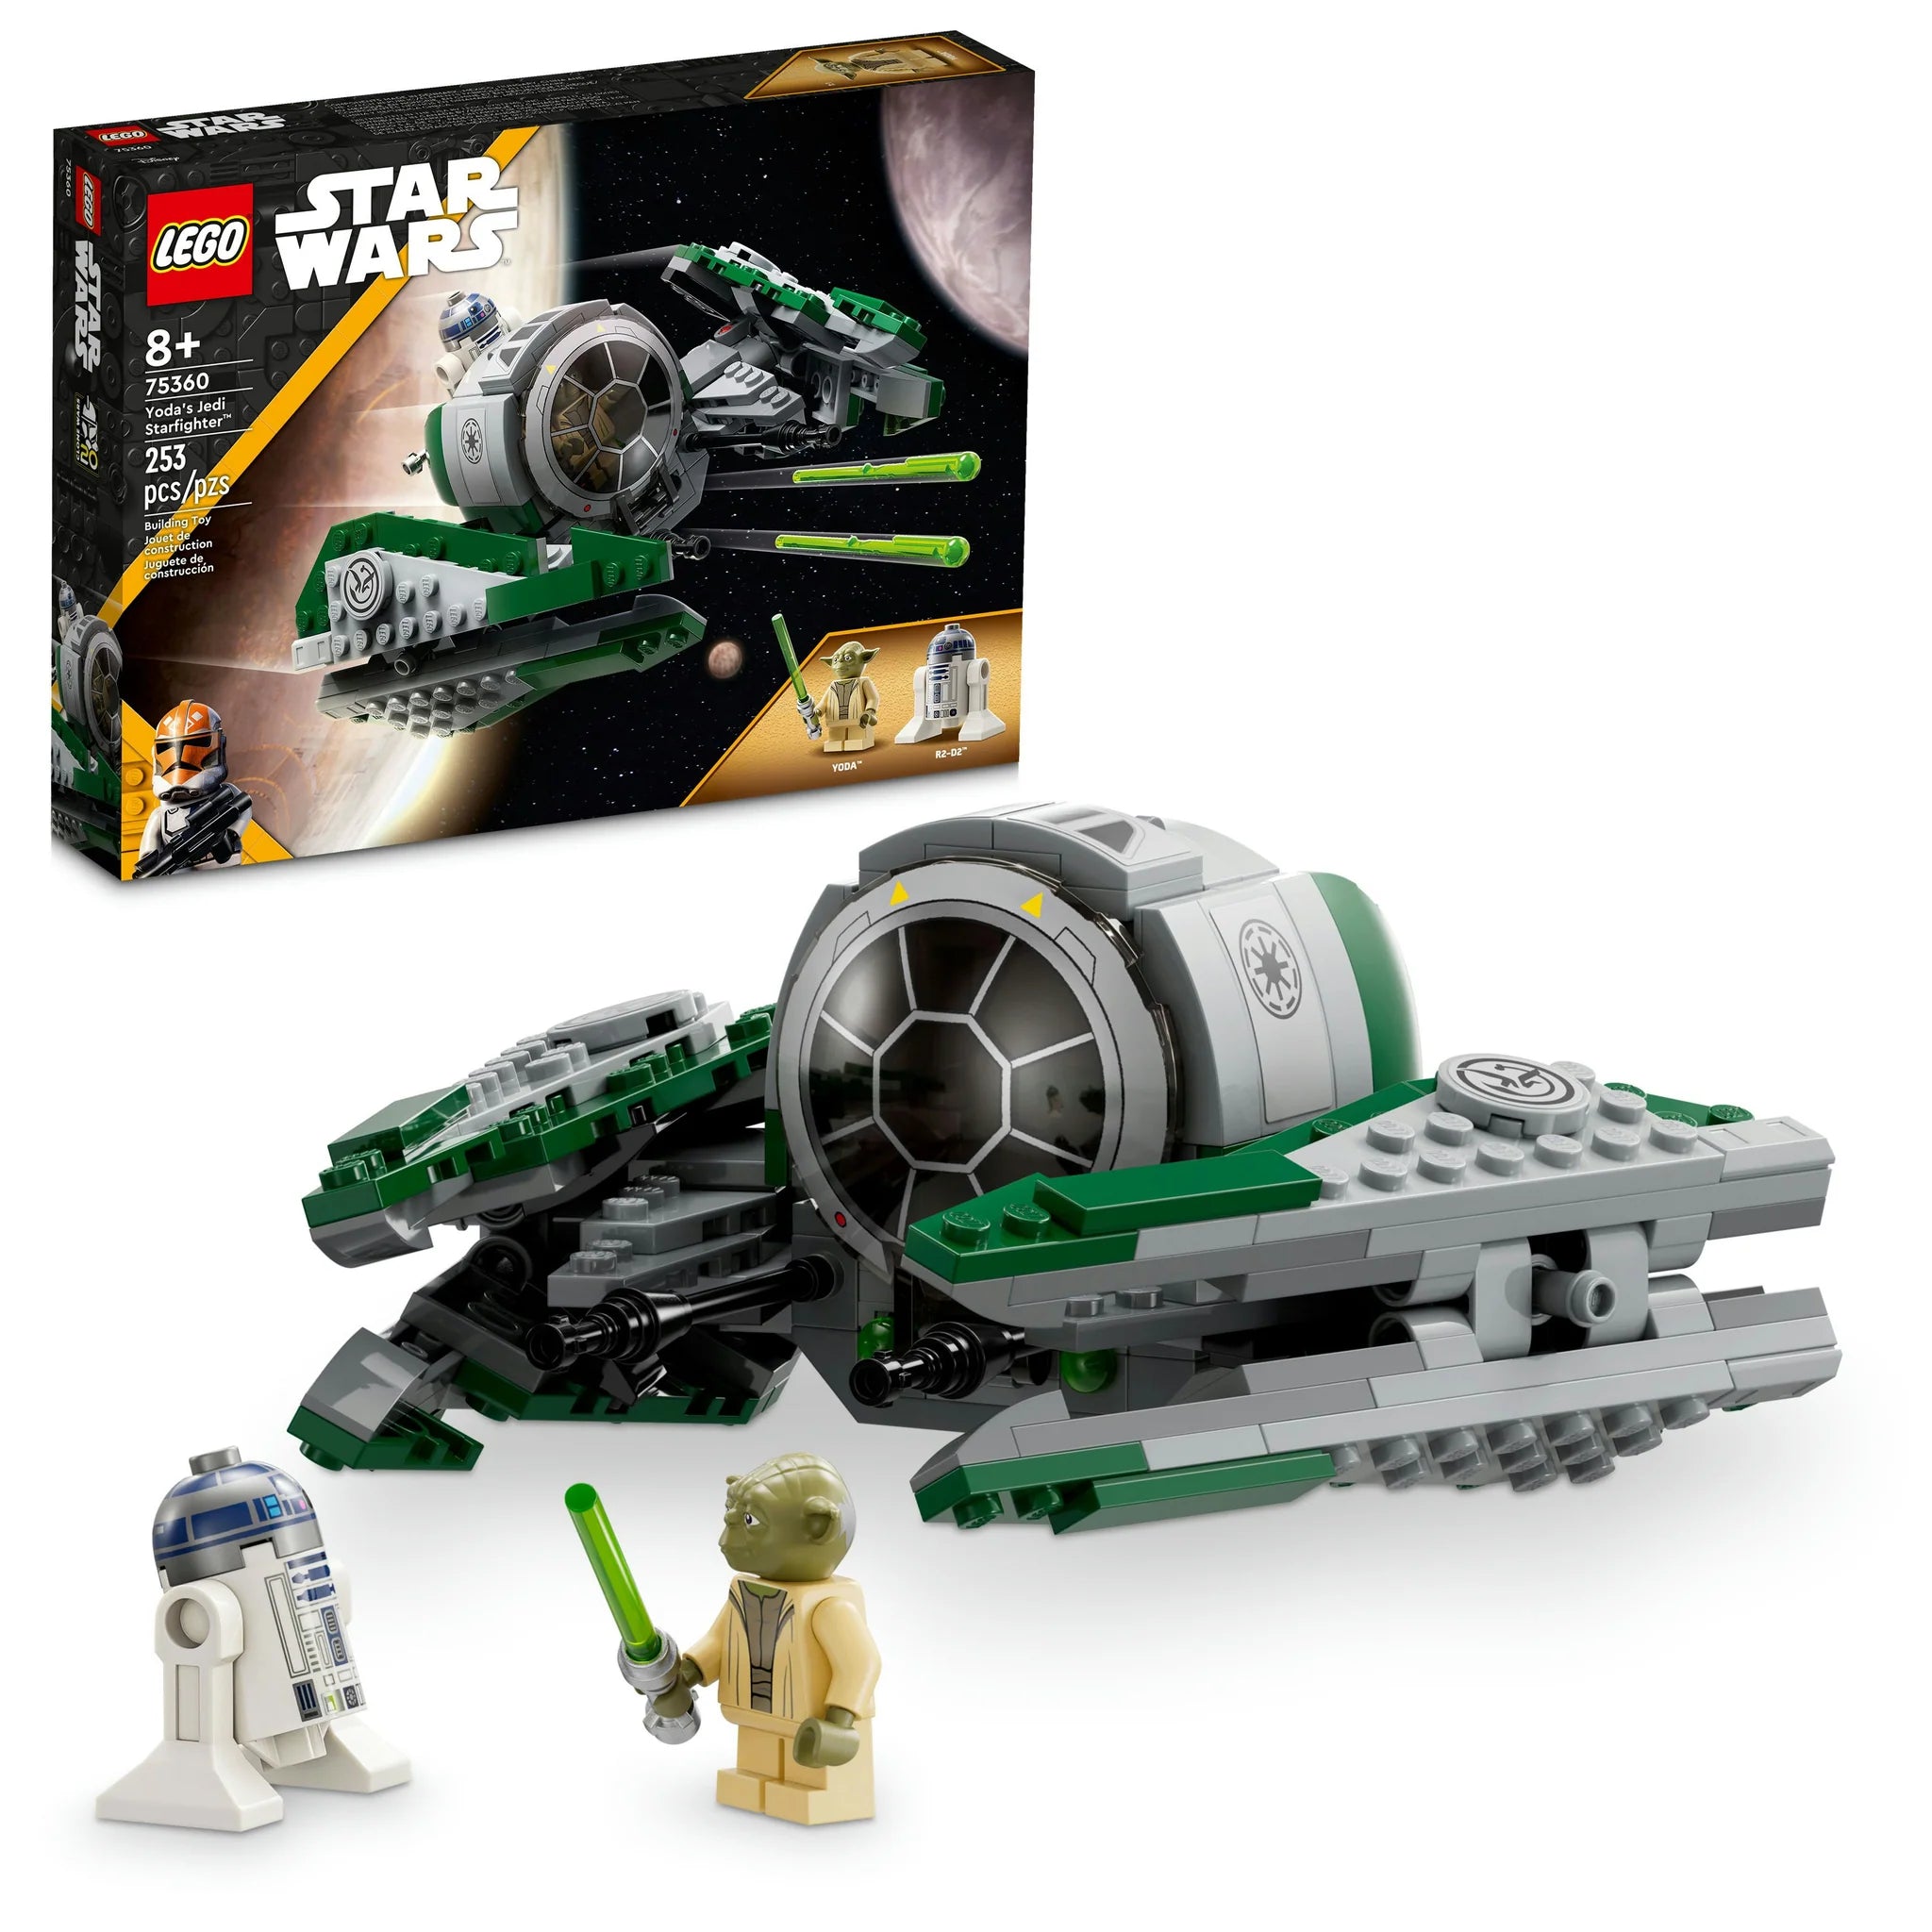 LEGO Star Wars: The Clone Wars Yoda’s Jedi Starfighter Star Wars Collectible for Kids Featuring Master Yoda Figure with Lightsaber Toy - 75360